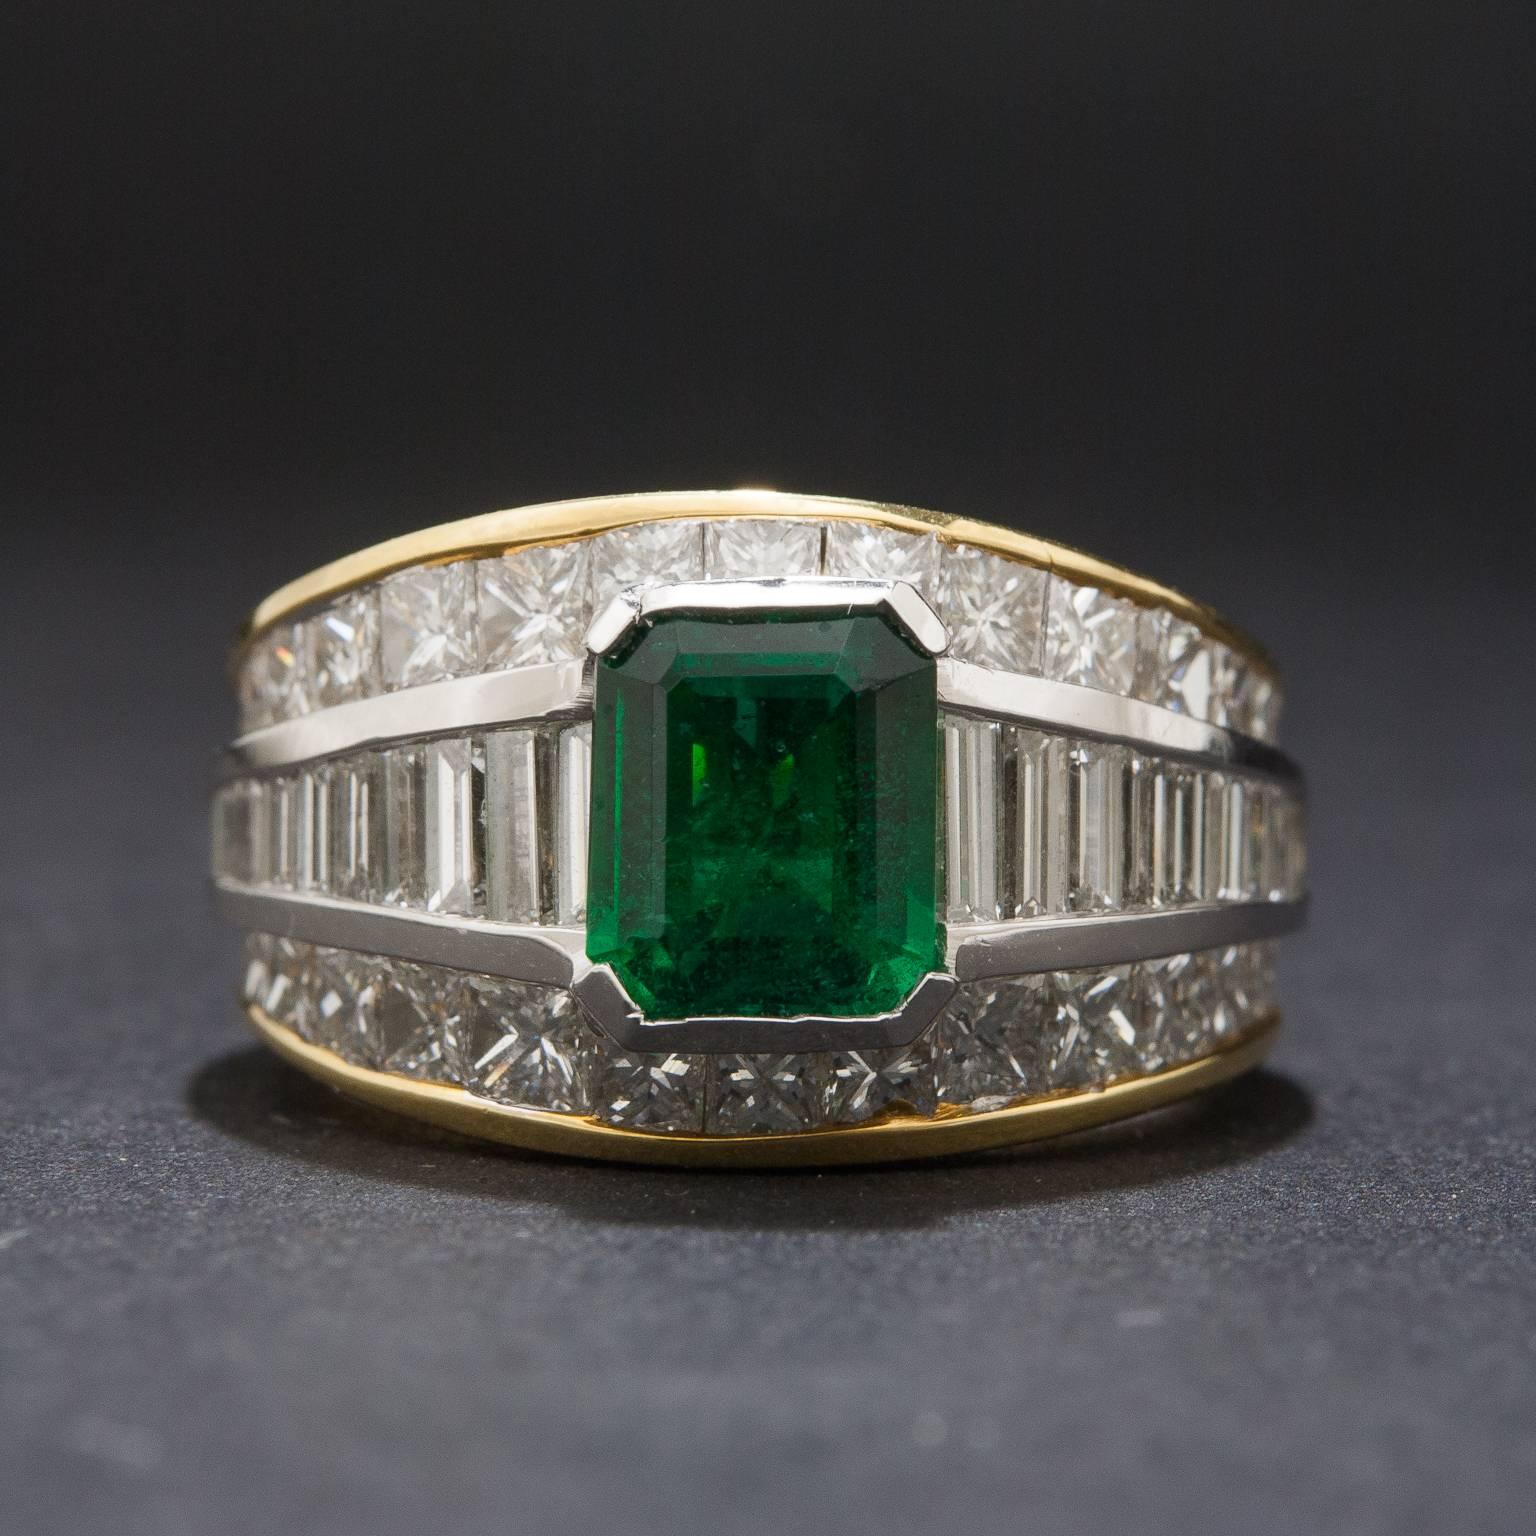 This stunning ring features a gorgeous 1.30 carat emerald and 2.50 total carats of tapered baguette and princess cut diamonds. The mounting is crafted in platinum and 18k yellow gold and it is currently size 6.5.